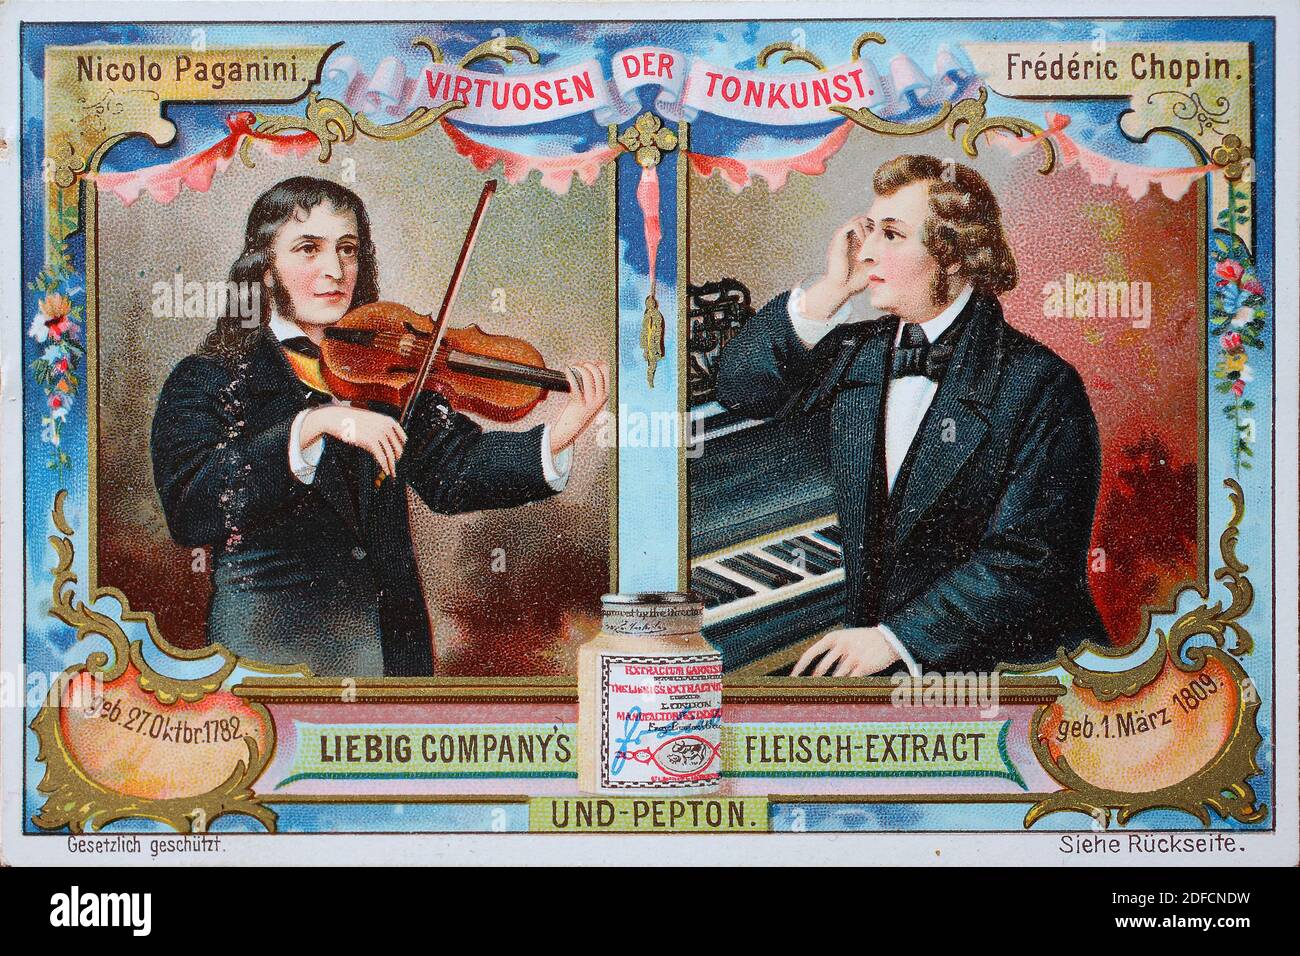 Picture series Virtuosi of the Art of Music, Nicolo Paganini and Fredric Chopin  /  Bildserie Virtuosen der Tonkunst, Nicolo Paganini und Fredric Chopin, Liebigbild, digital improved reproduction of a collectible image from the Liebig company, estimated from 1900, pd  /  digital verbesserte Reproduktion eines Sammelbildes von ca 1900, gemeinfrei, Stock Photo